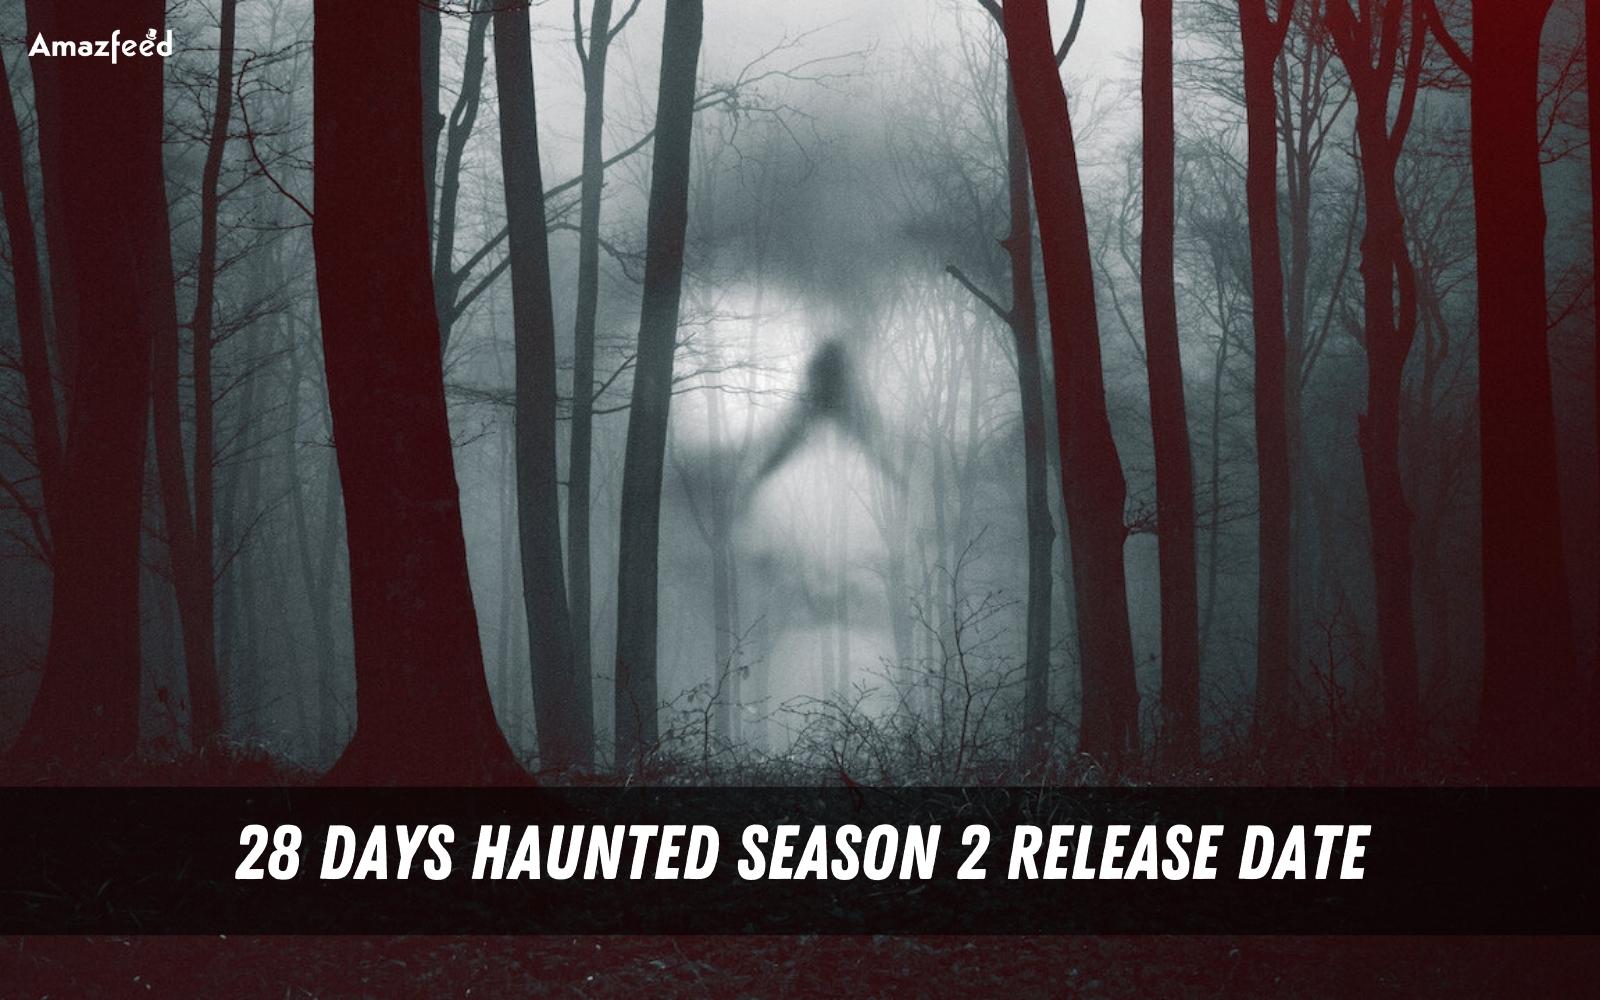 28 Days Haunted Season 2 Release Date will it ever happen, or will it